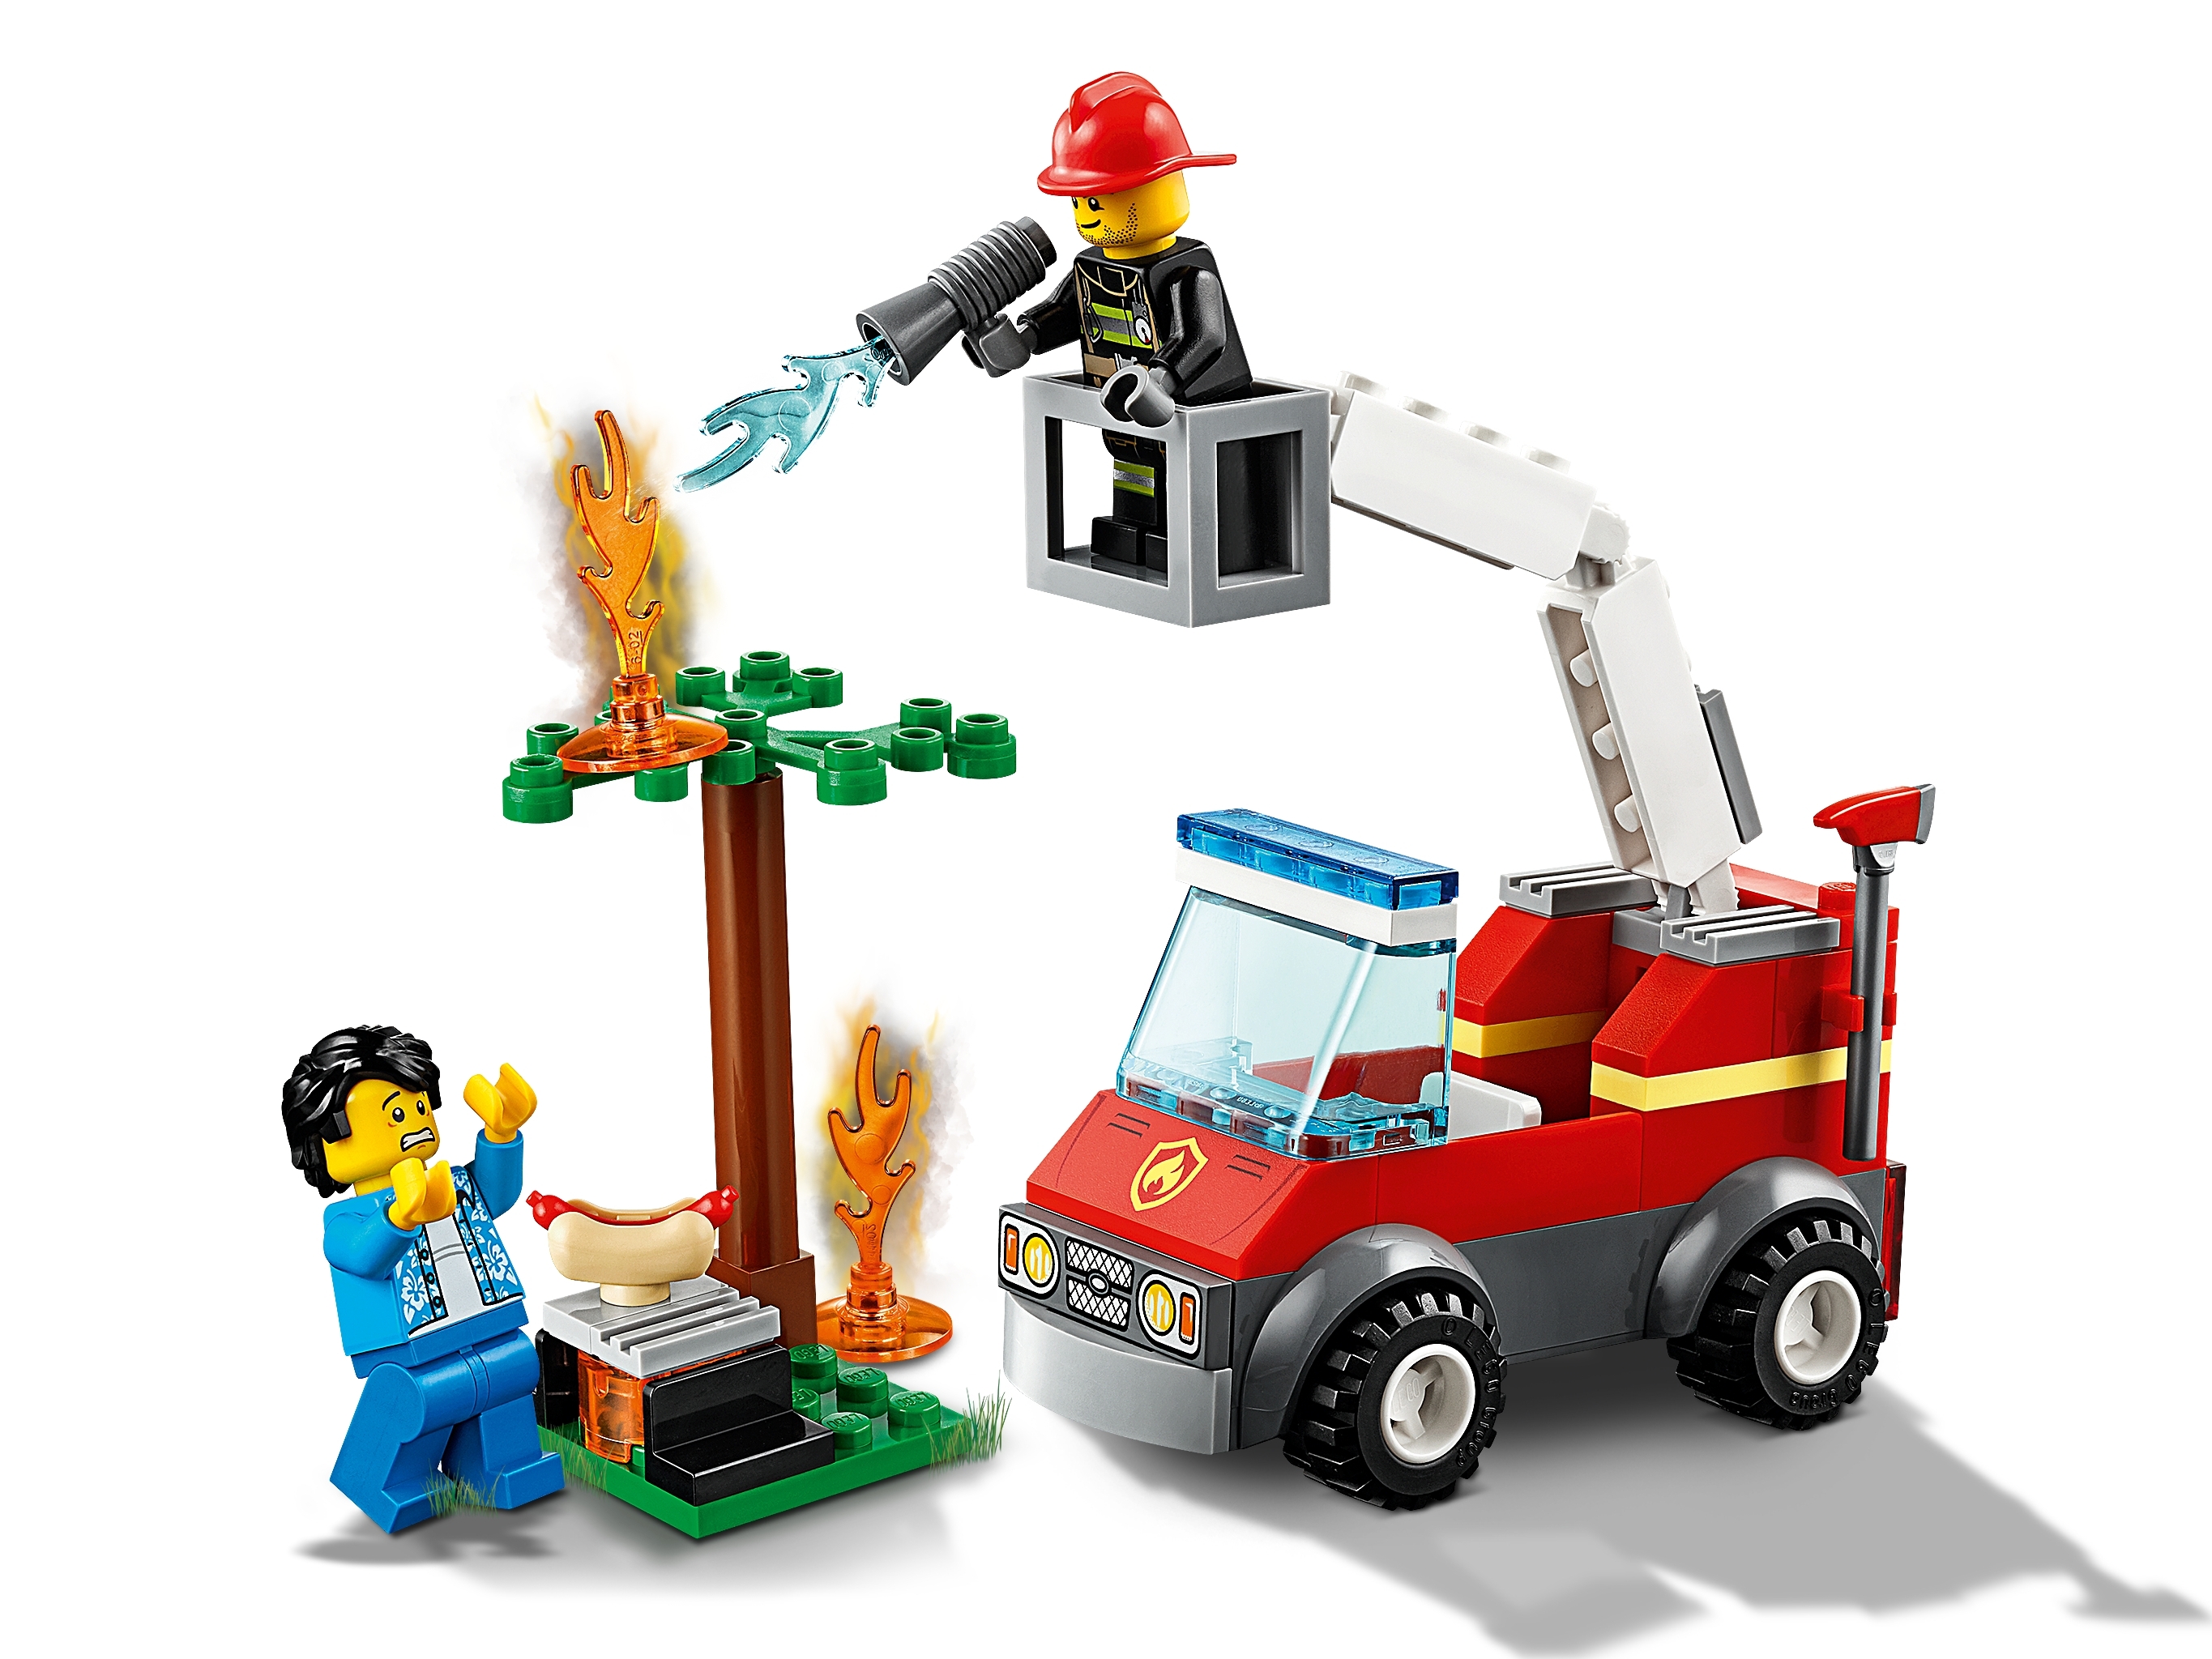 60212 LEGO City Barbecue Burn Out w/ Fire Engine Truck & 2 Minifigures New Boxed